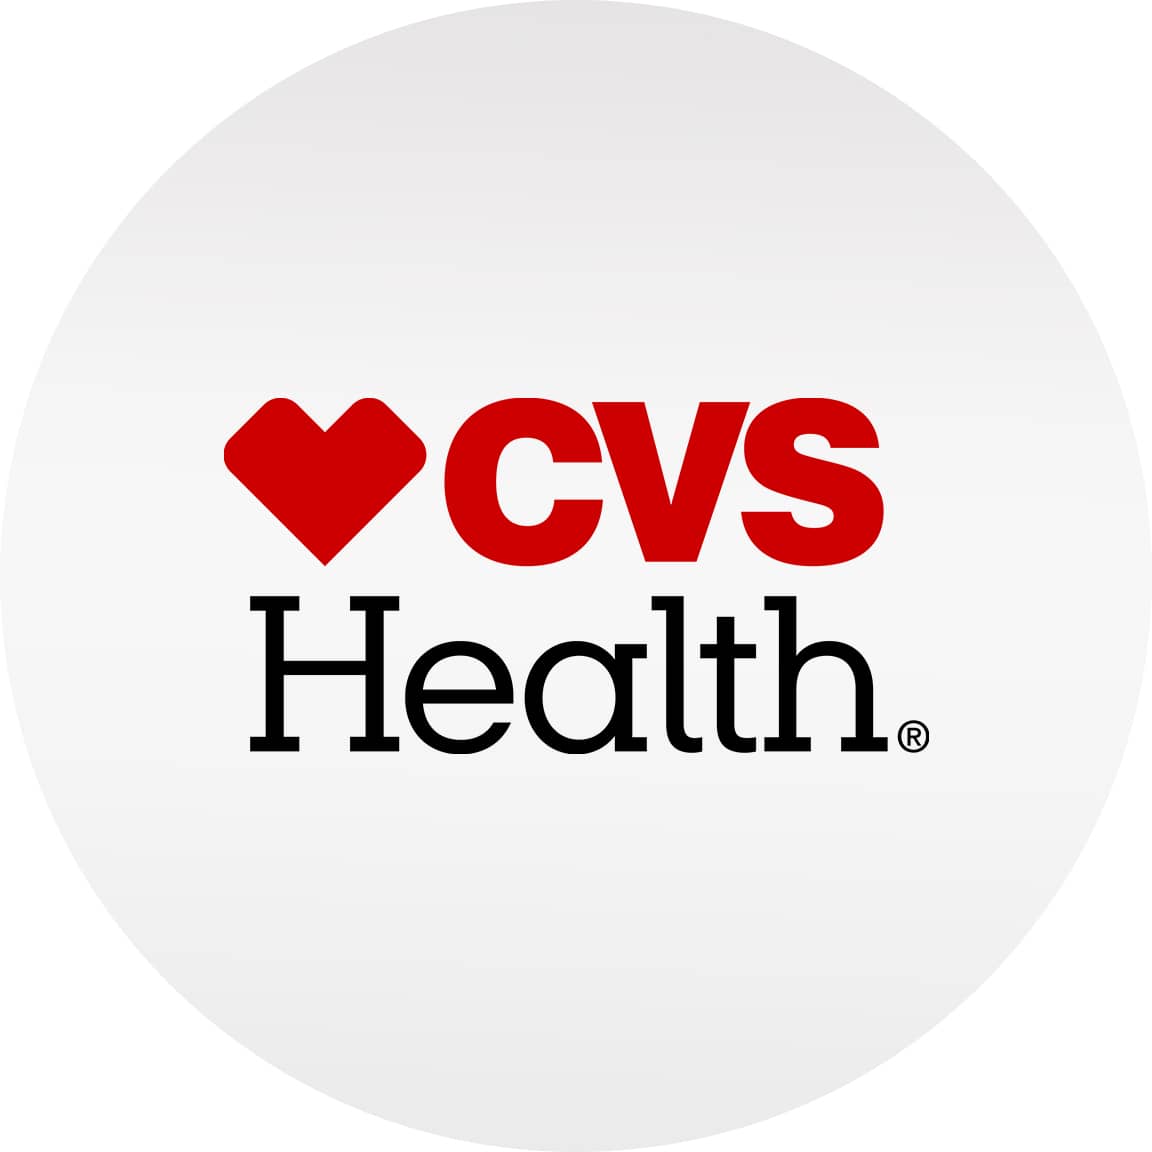 Shop for CVS Health® brand products